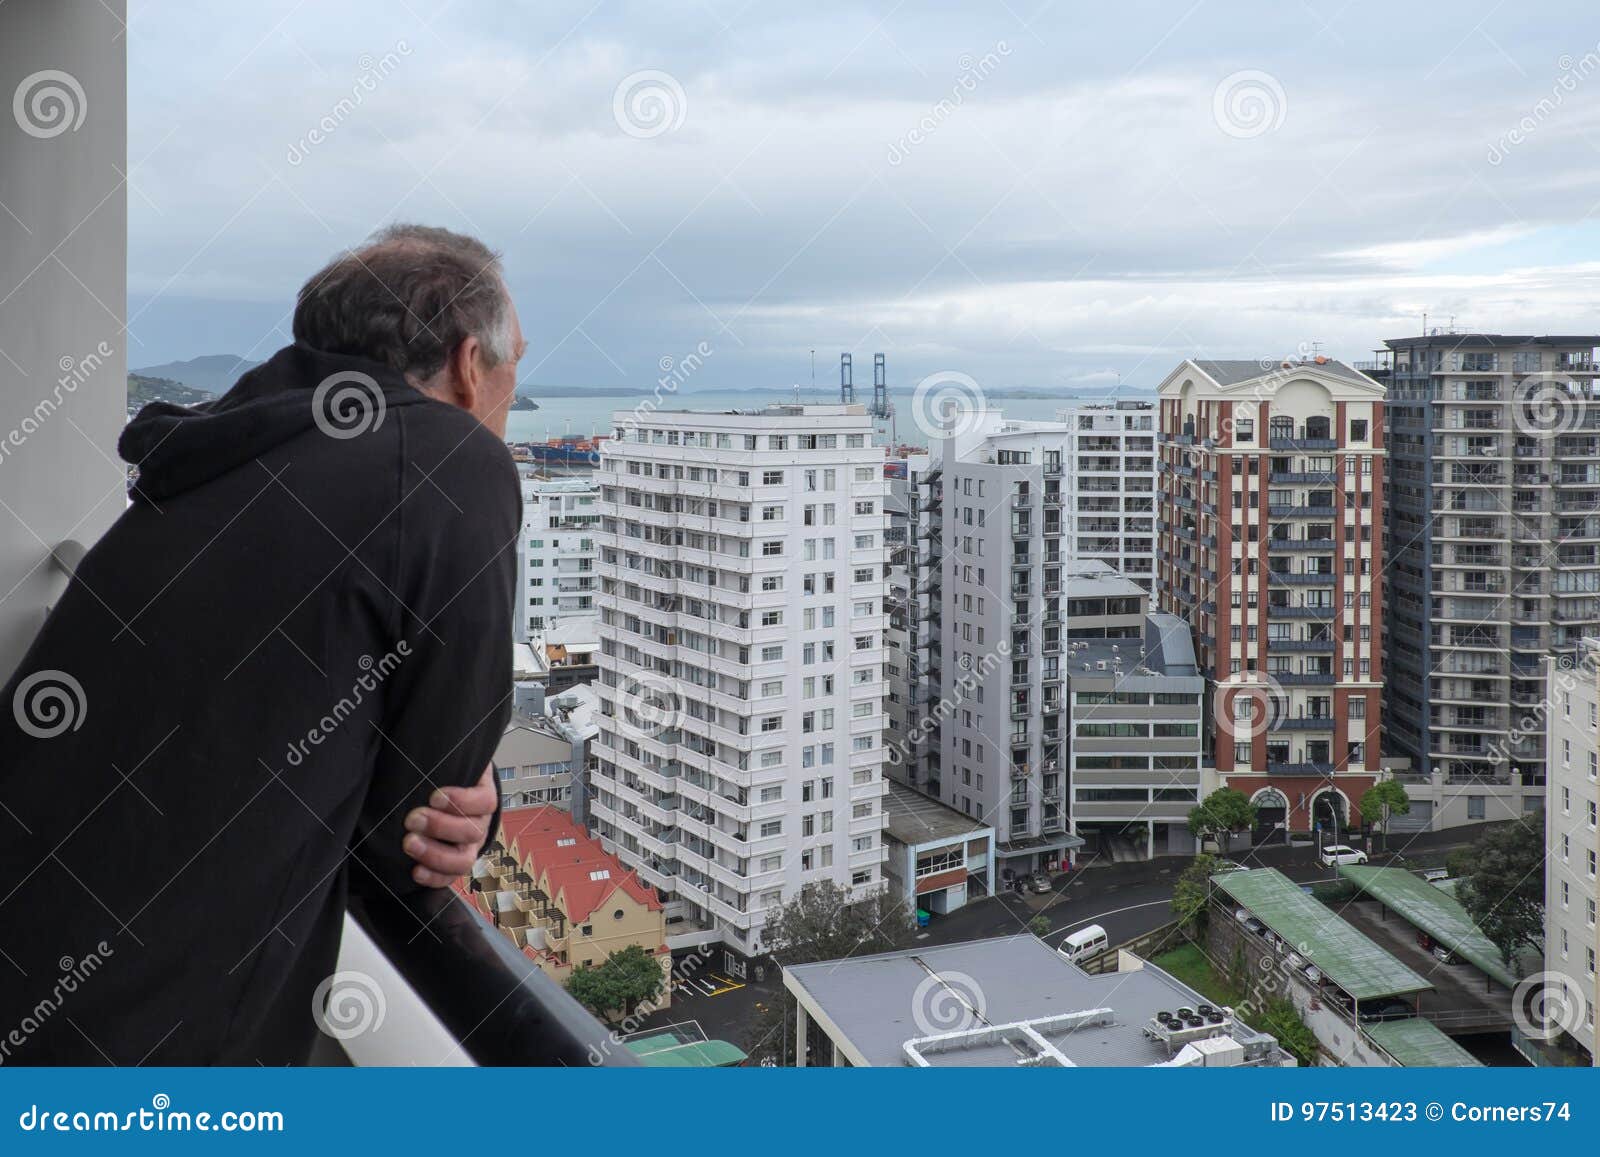 baby boomer retired man looks at view of apartment buildings in